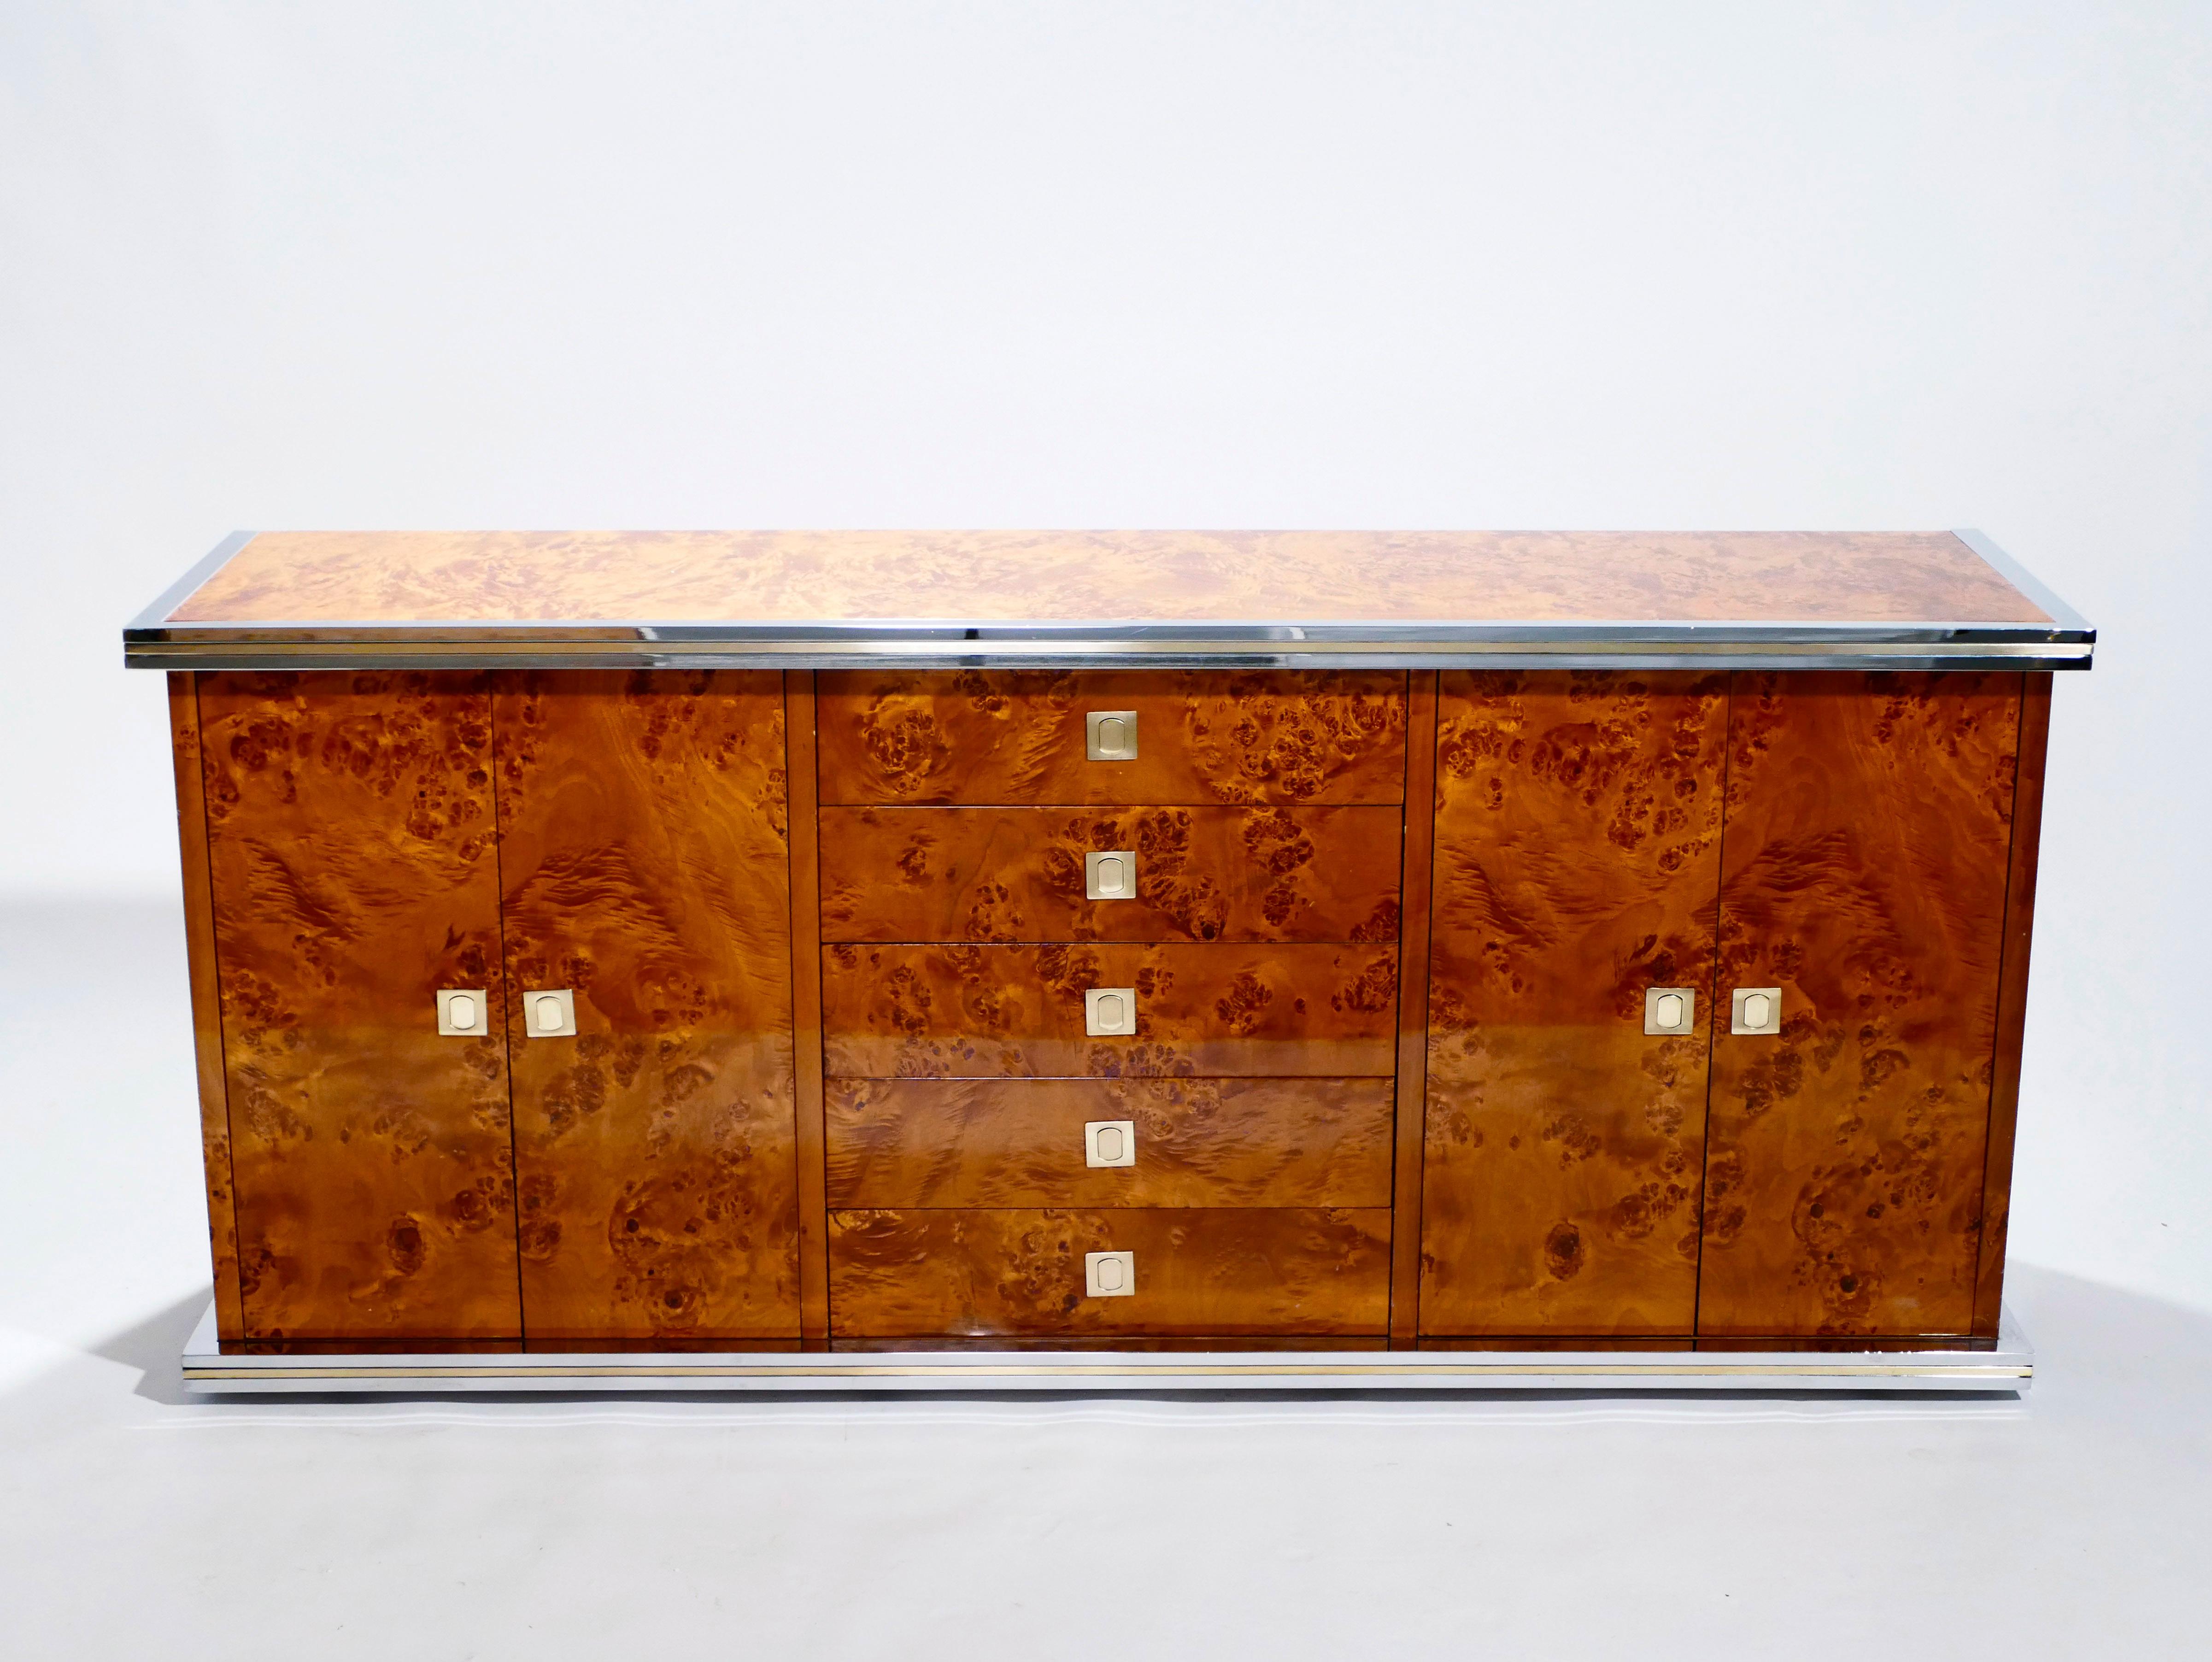 Rich burl wood is the eye-catching chief material in this beautiful, rare credenza by Willy Rizzo. The wood sides and top swirl and ripple into shades of caramel and coffee brown, for a warm, glossy look. Brass and chrome accents, along the clean